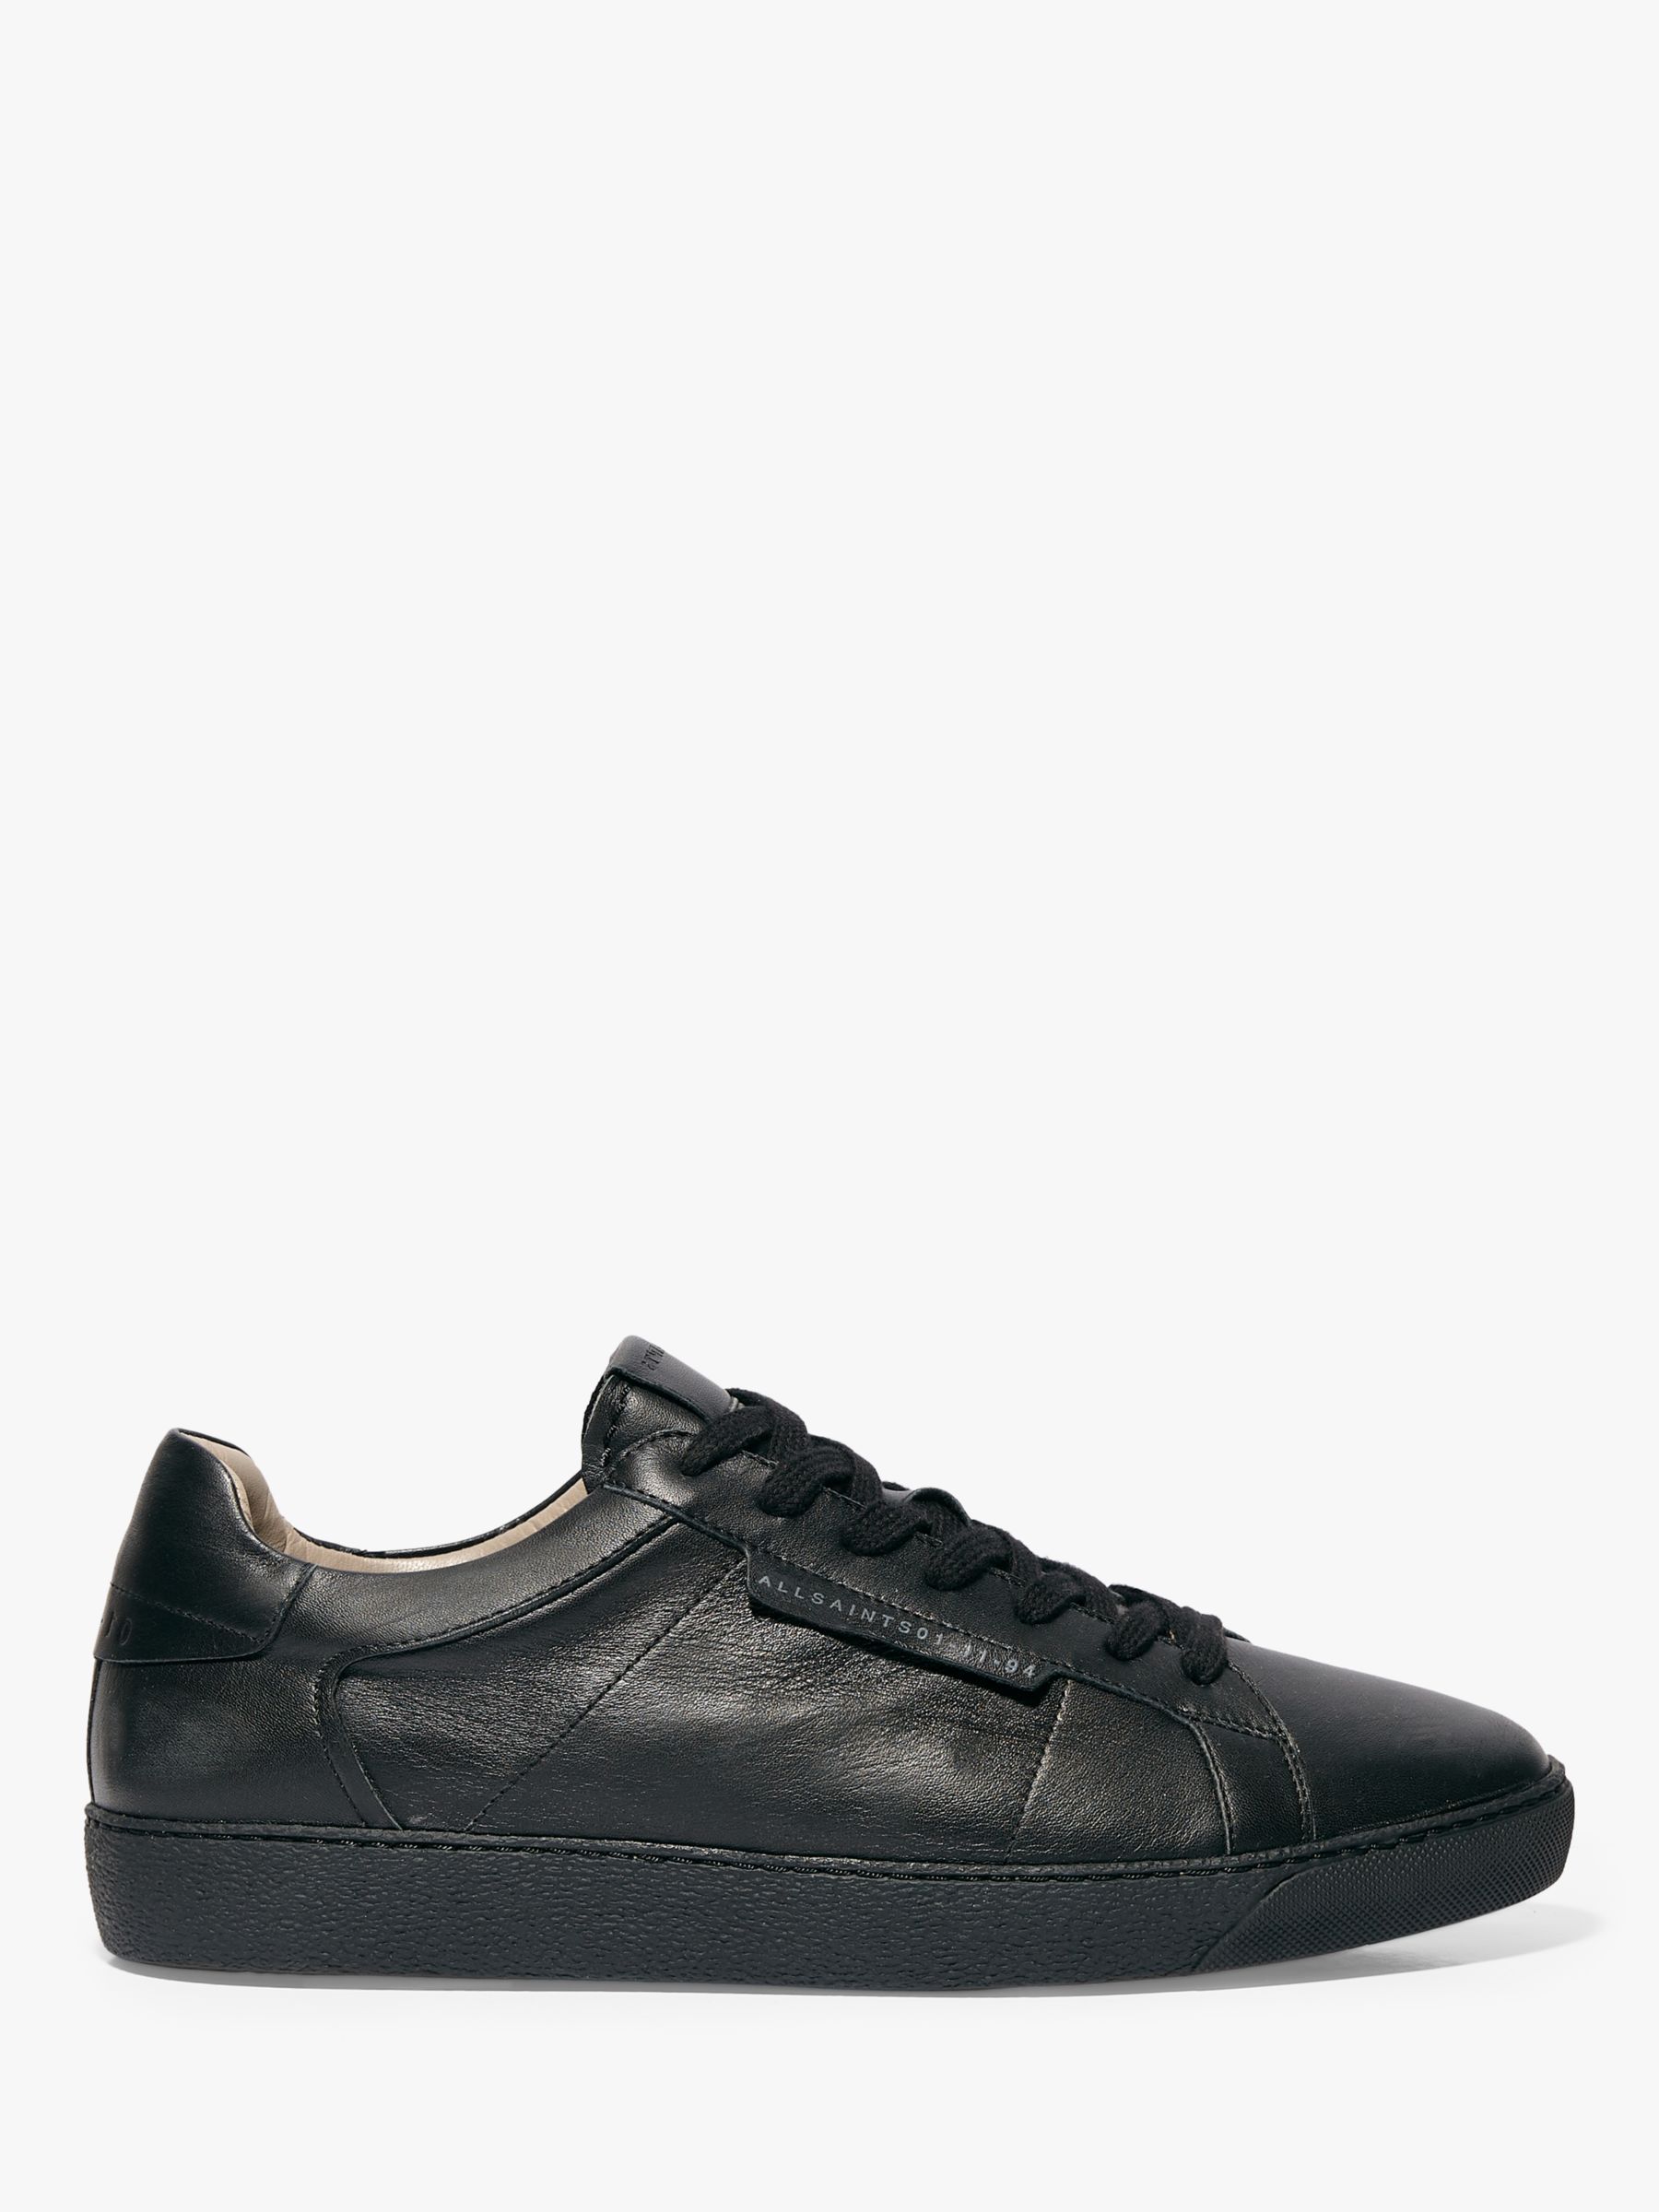 AllSaints Sheer Leather Low Top Trainers, Black at John Lewis & Partners